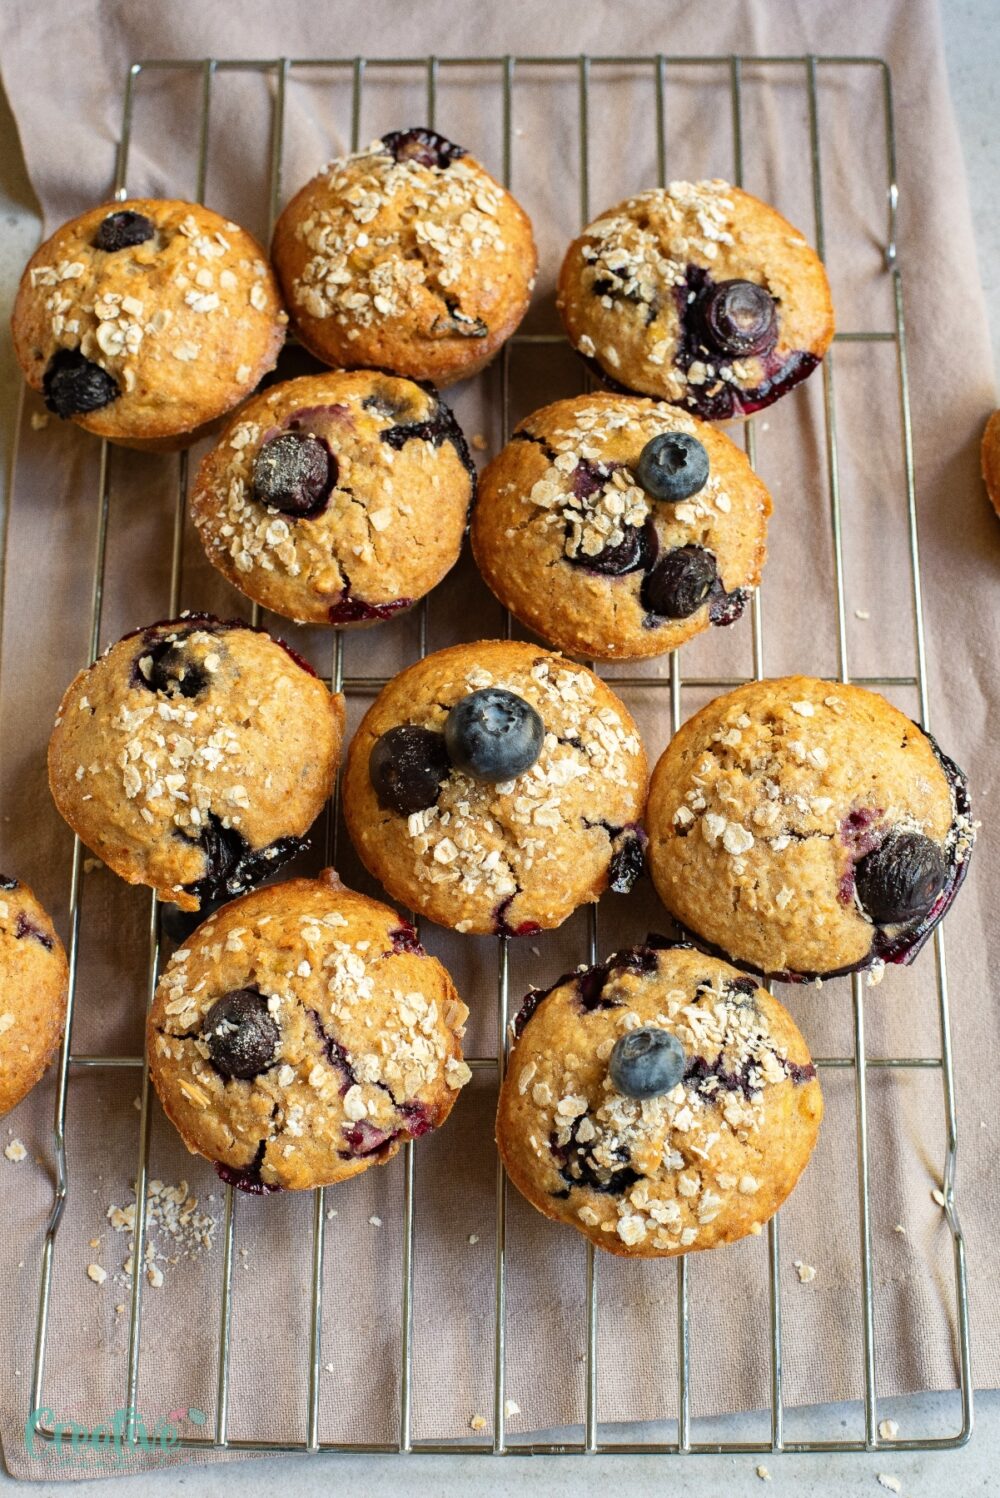 Deliciously moist and full of flavor, these whole wheat banana blueberry muffins are a wholesome treat packed with fiber and nutrients. Perfect for breakfast, a snack, or a sweet finish - and completely customizable.